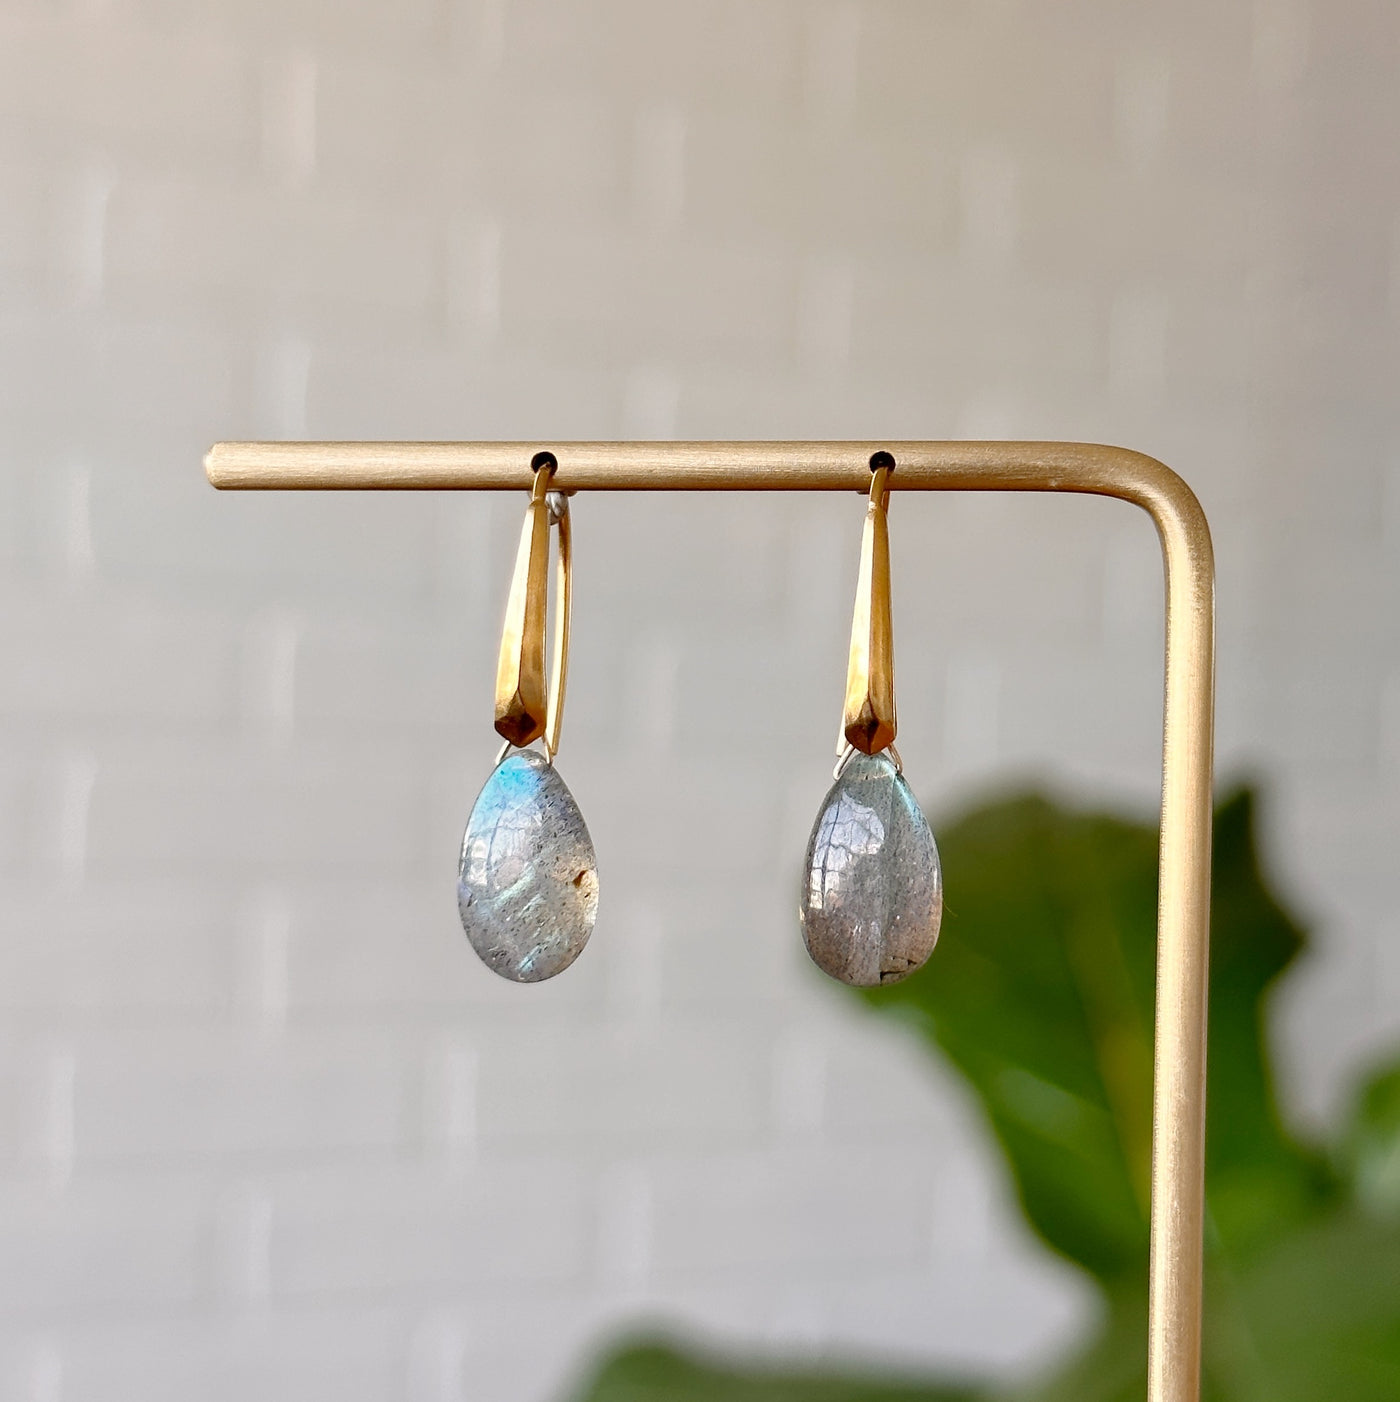 Labradorite earrings in gold vermeil hanging on gold stand in front of a white wall, front angle